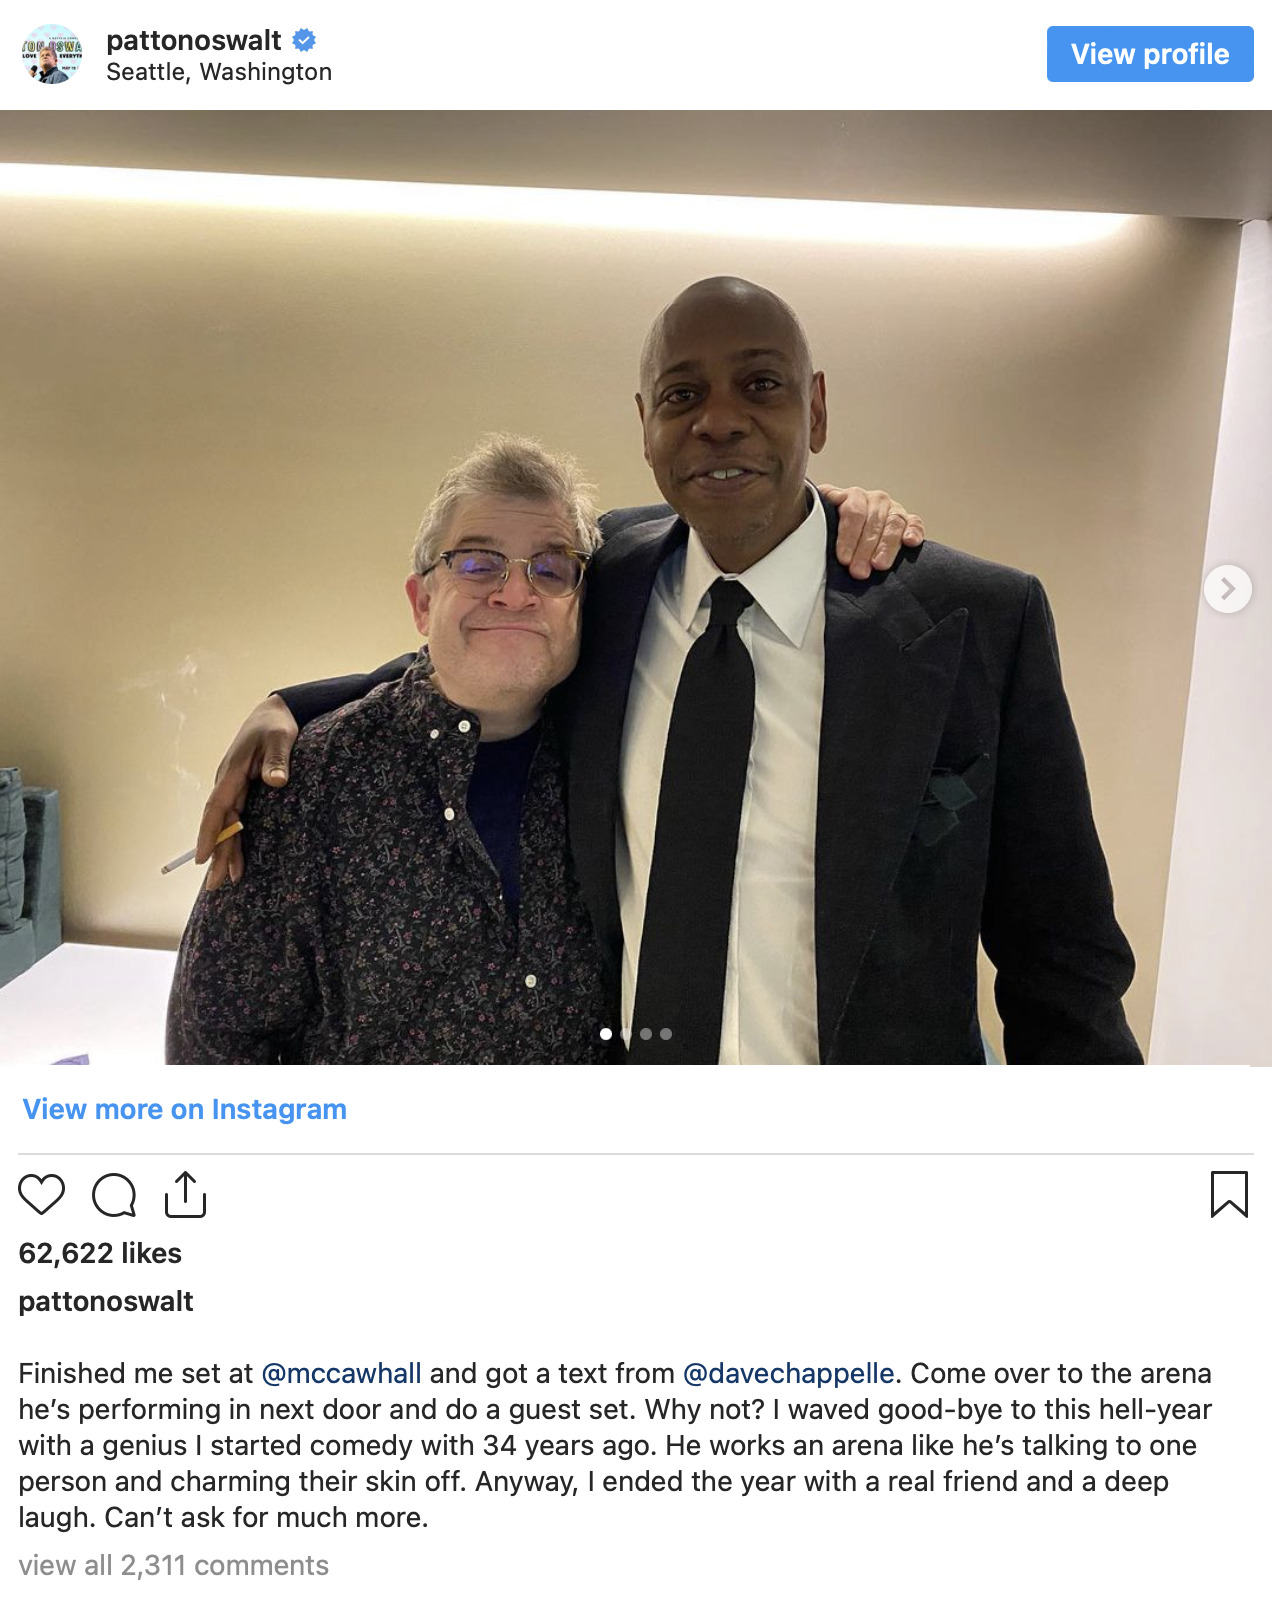 Patton Oswalt rings in the New Year with his old friend, Dave Chappelle